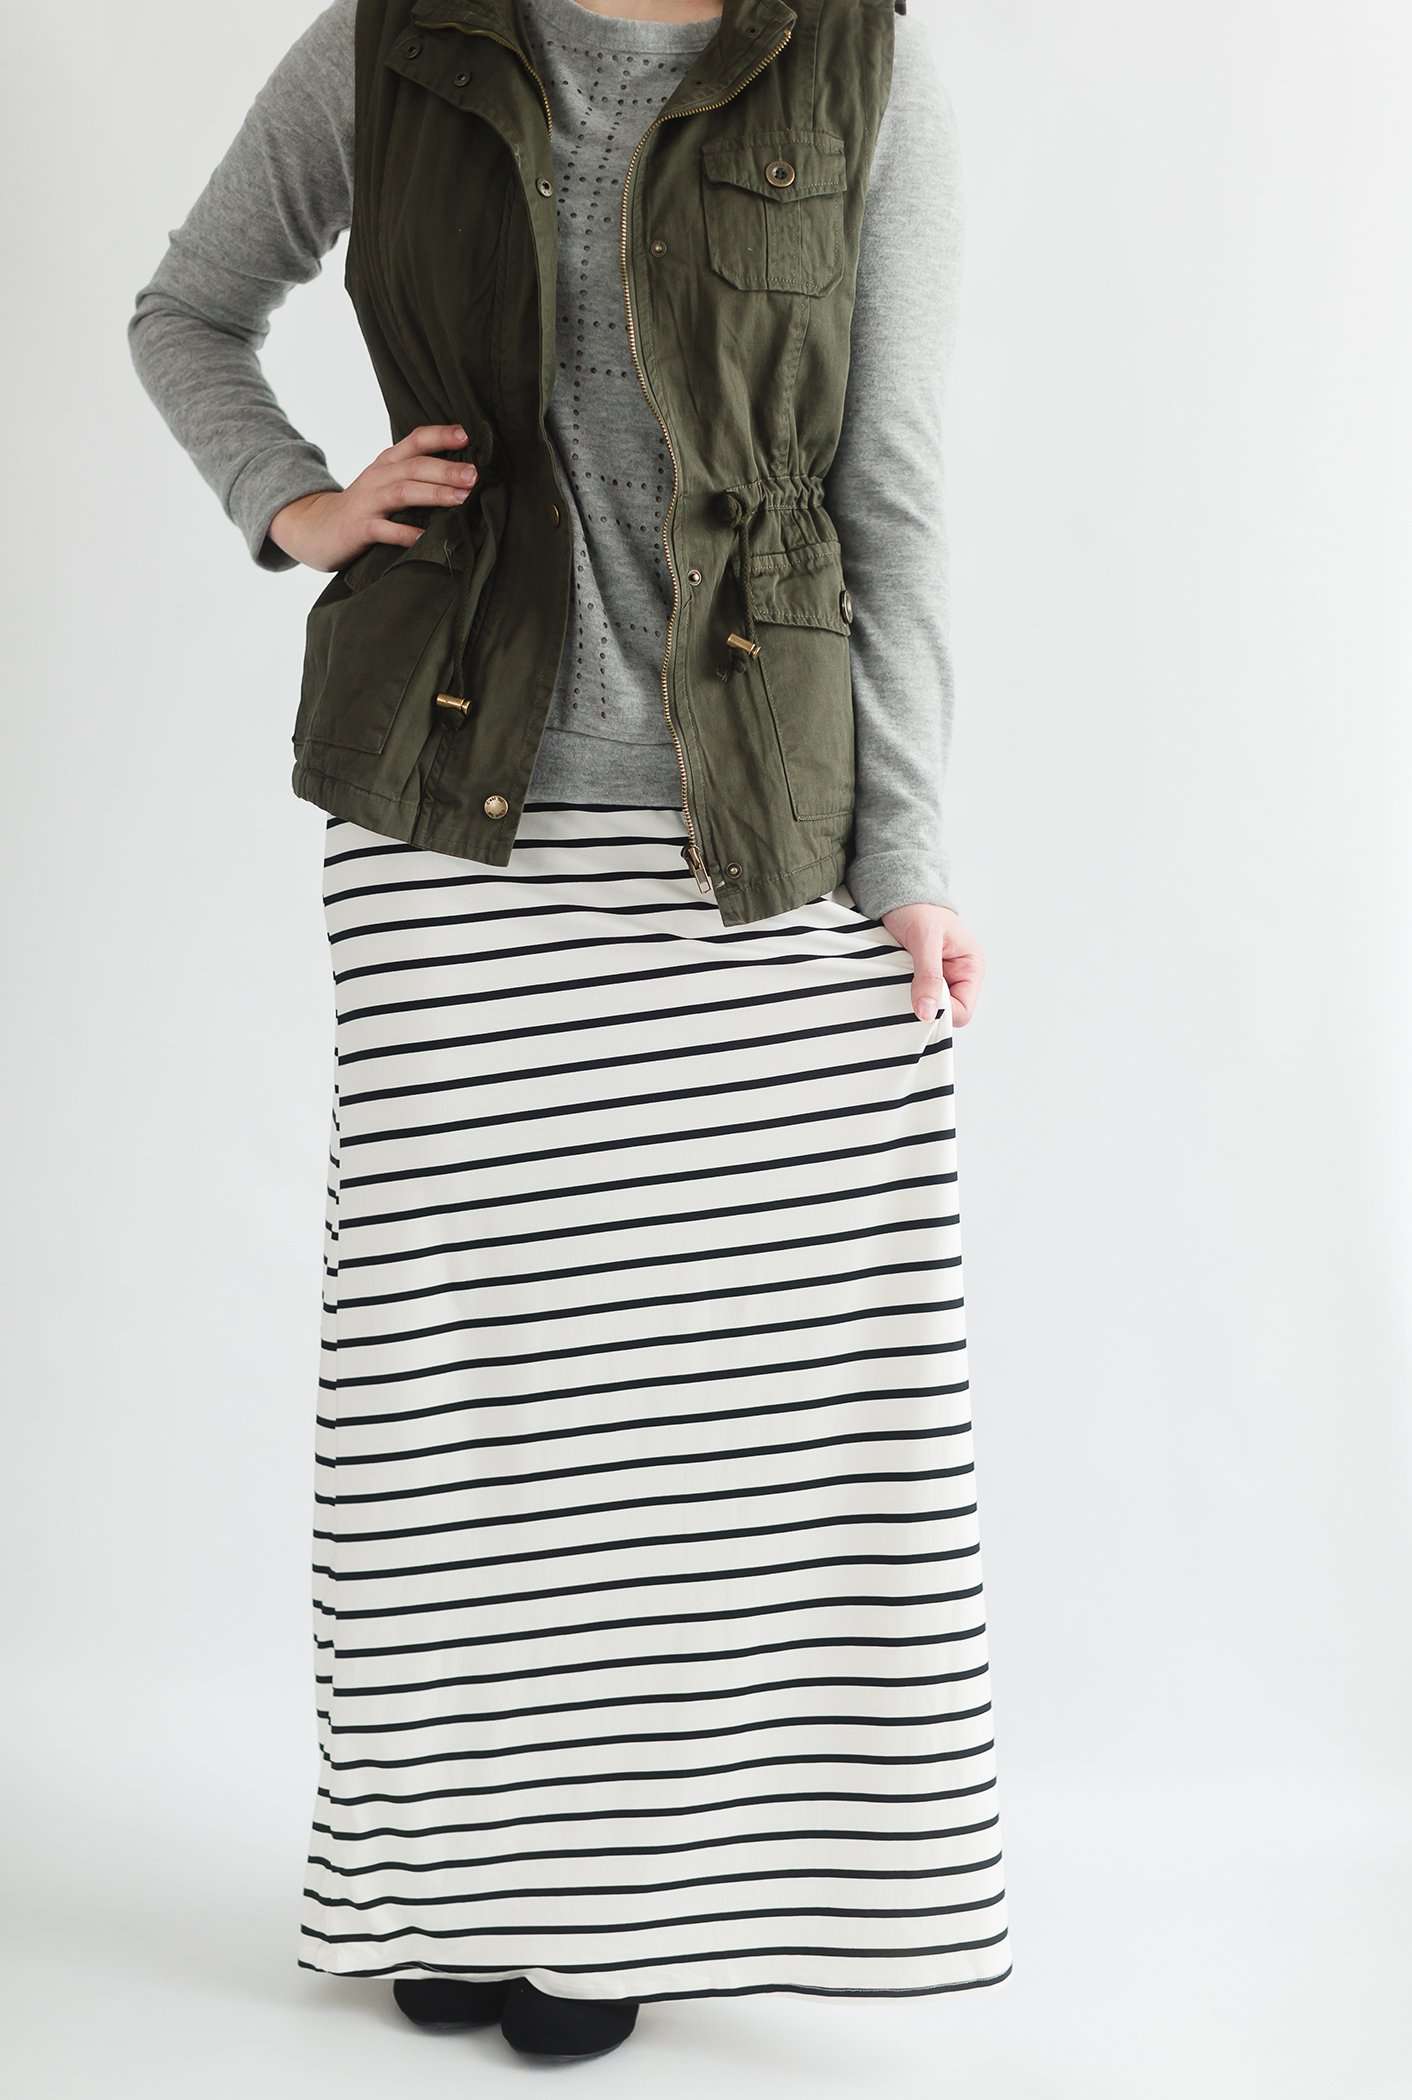 Stretchy modest maxi skirt comes in black, charcoal, olive, burgundy or classic stripe.